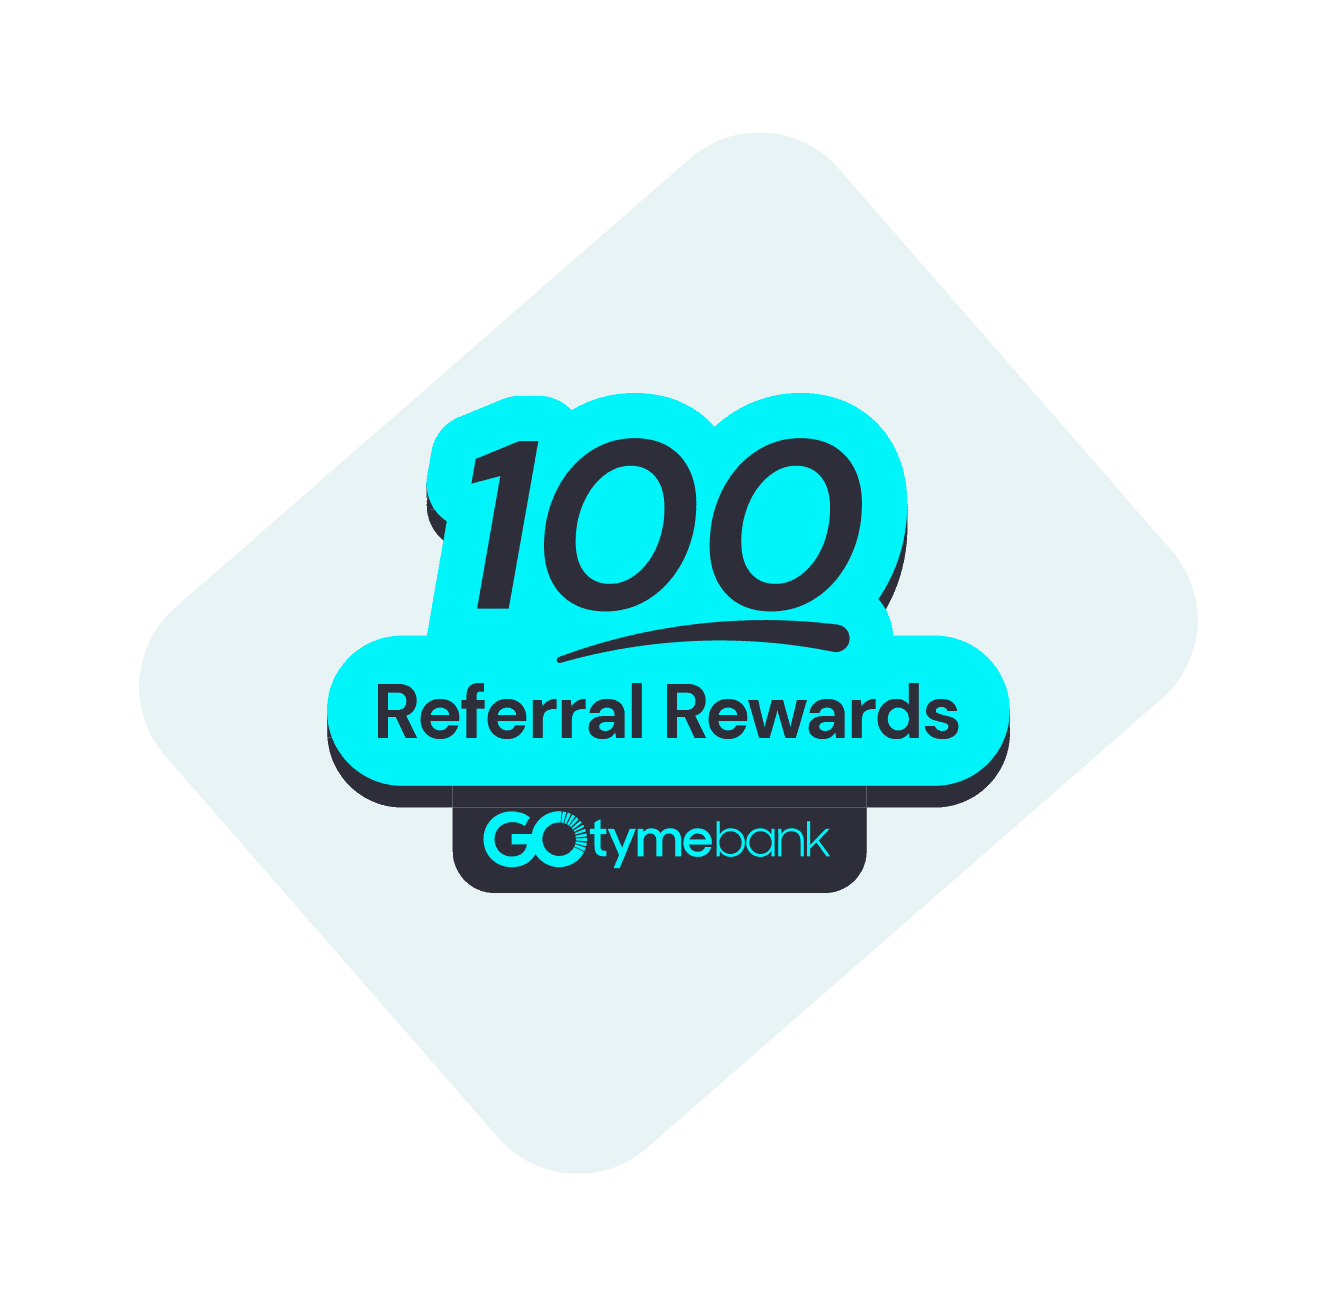 Earn 100 Go Rewards points with a unique referral code